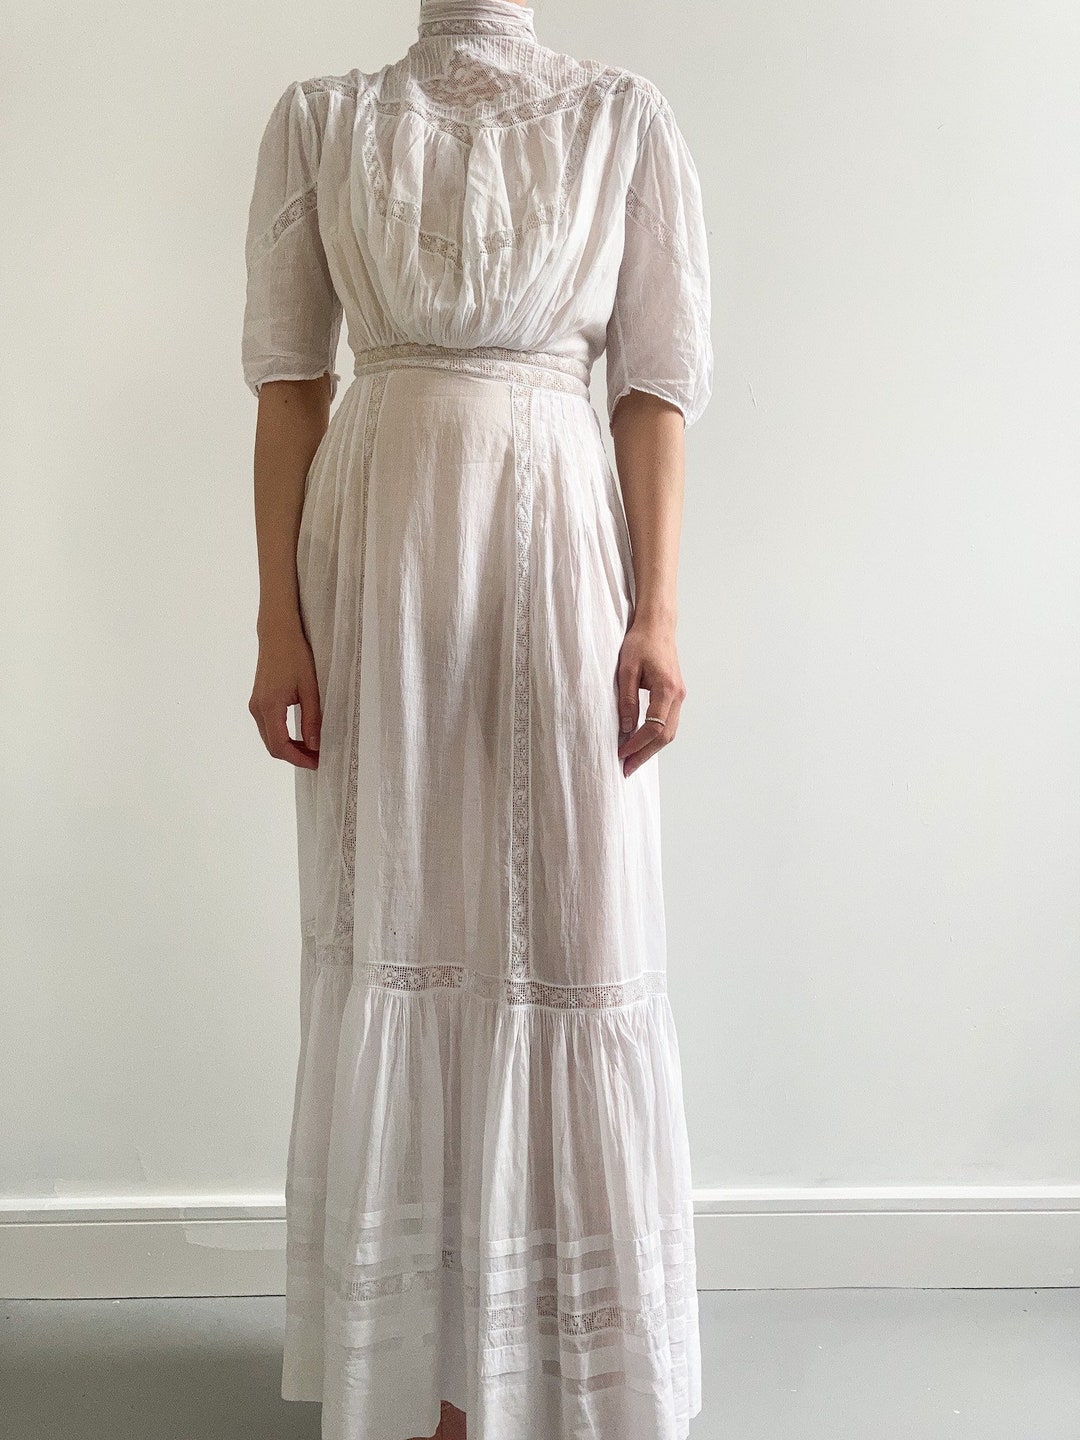 Antique Edwardian Cotton Lawn Gown With Lace Embroidery - Etsy